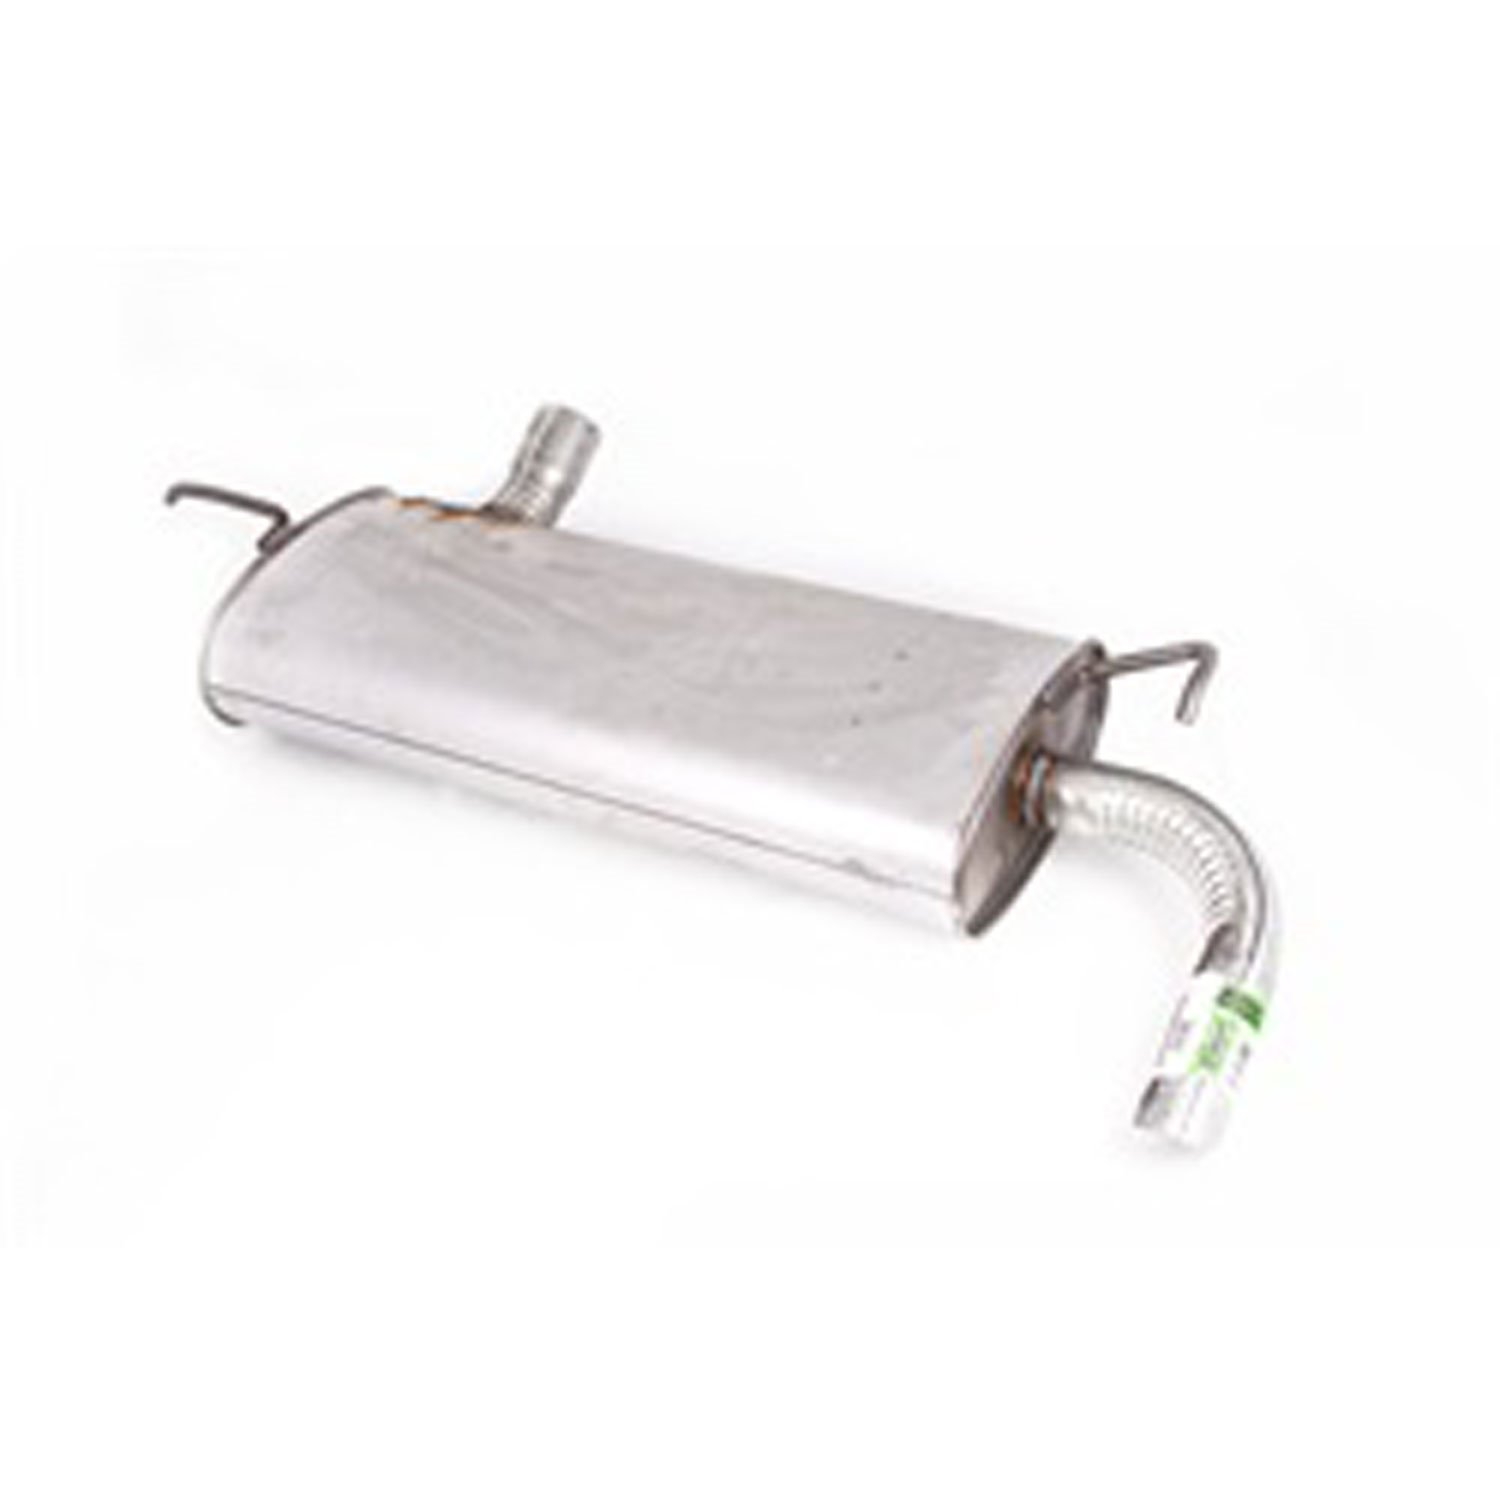 Replacement muffler from Omix-ADA, Fits 07-11 Jeep Wranglers.